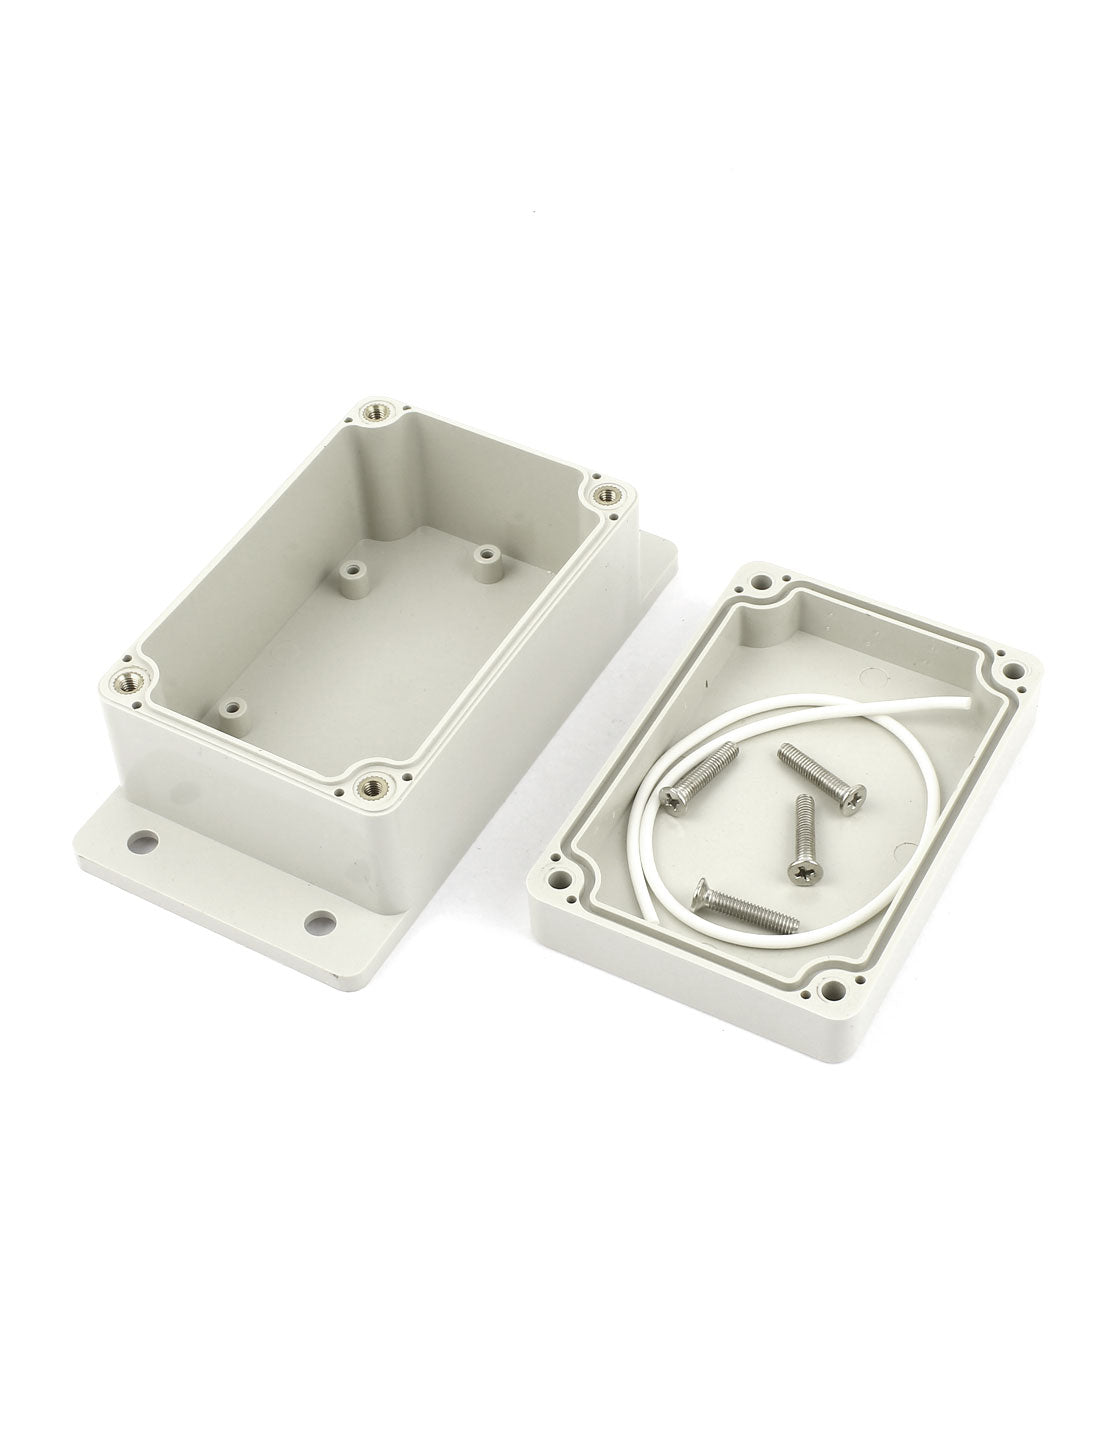 uxcell Uxcell 100mm x 68mm x 50mm Plastic Dustproof IP65 Sealed DIY Joint Electrical Junction Box